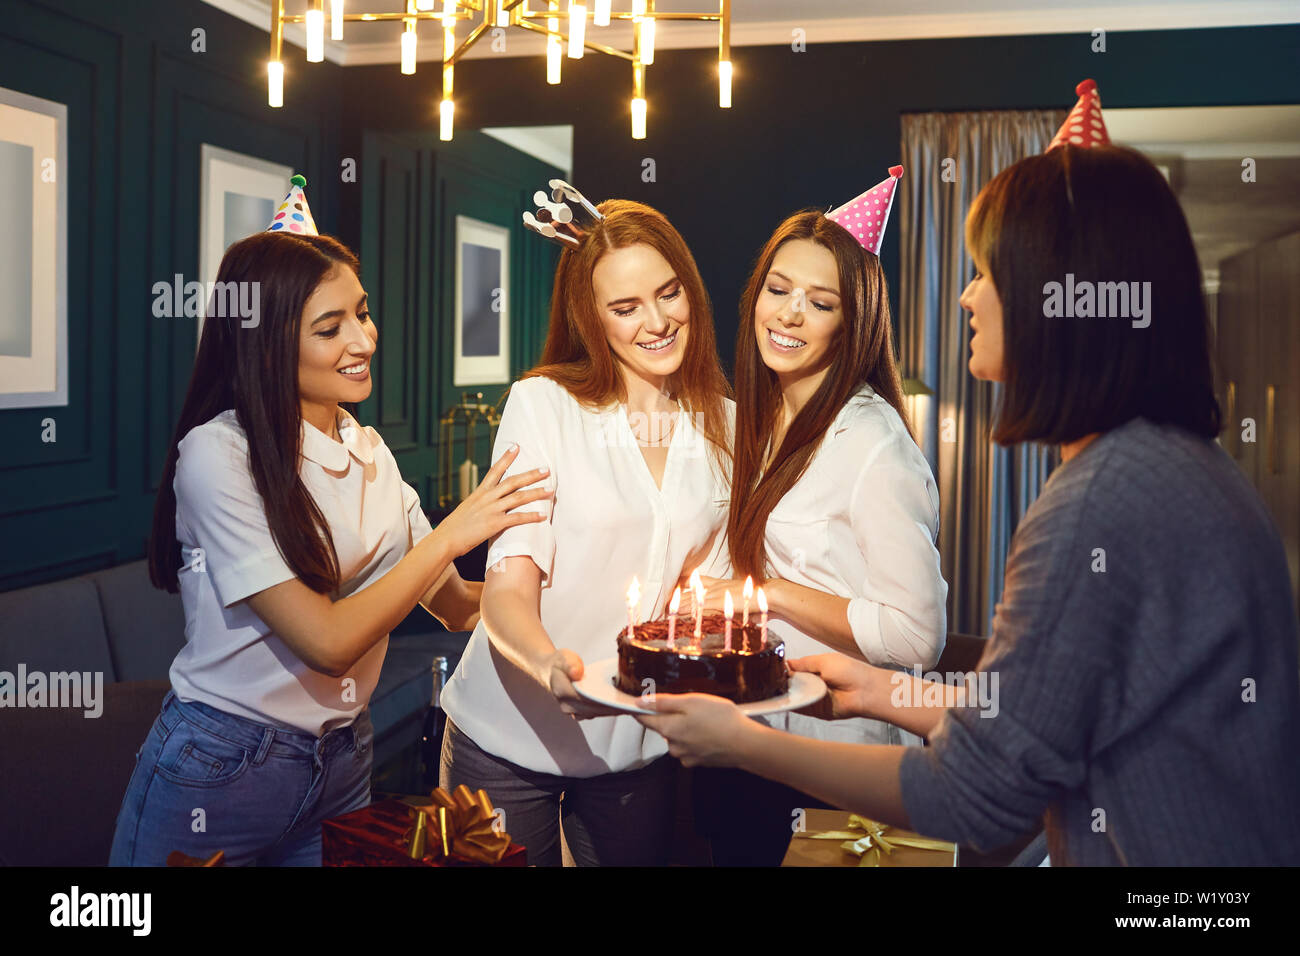 Girlfriends congratulate with cake and candles for a birthday party at home Stock Photo